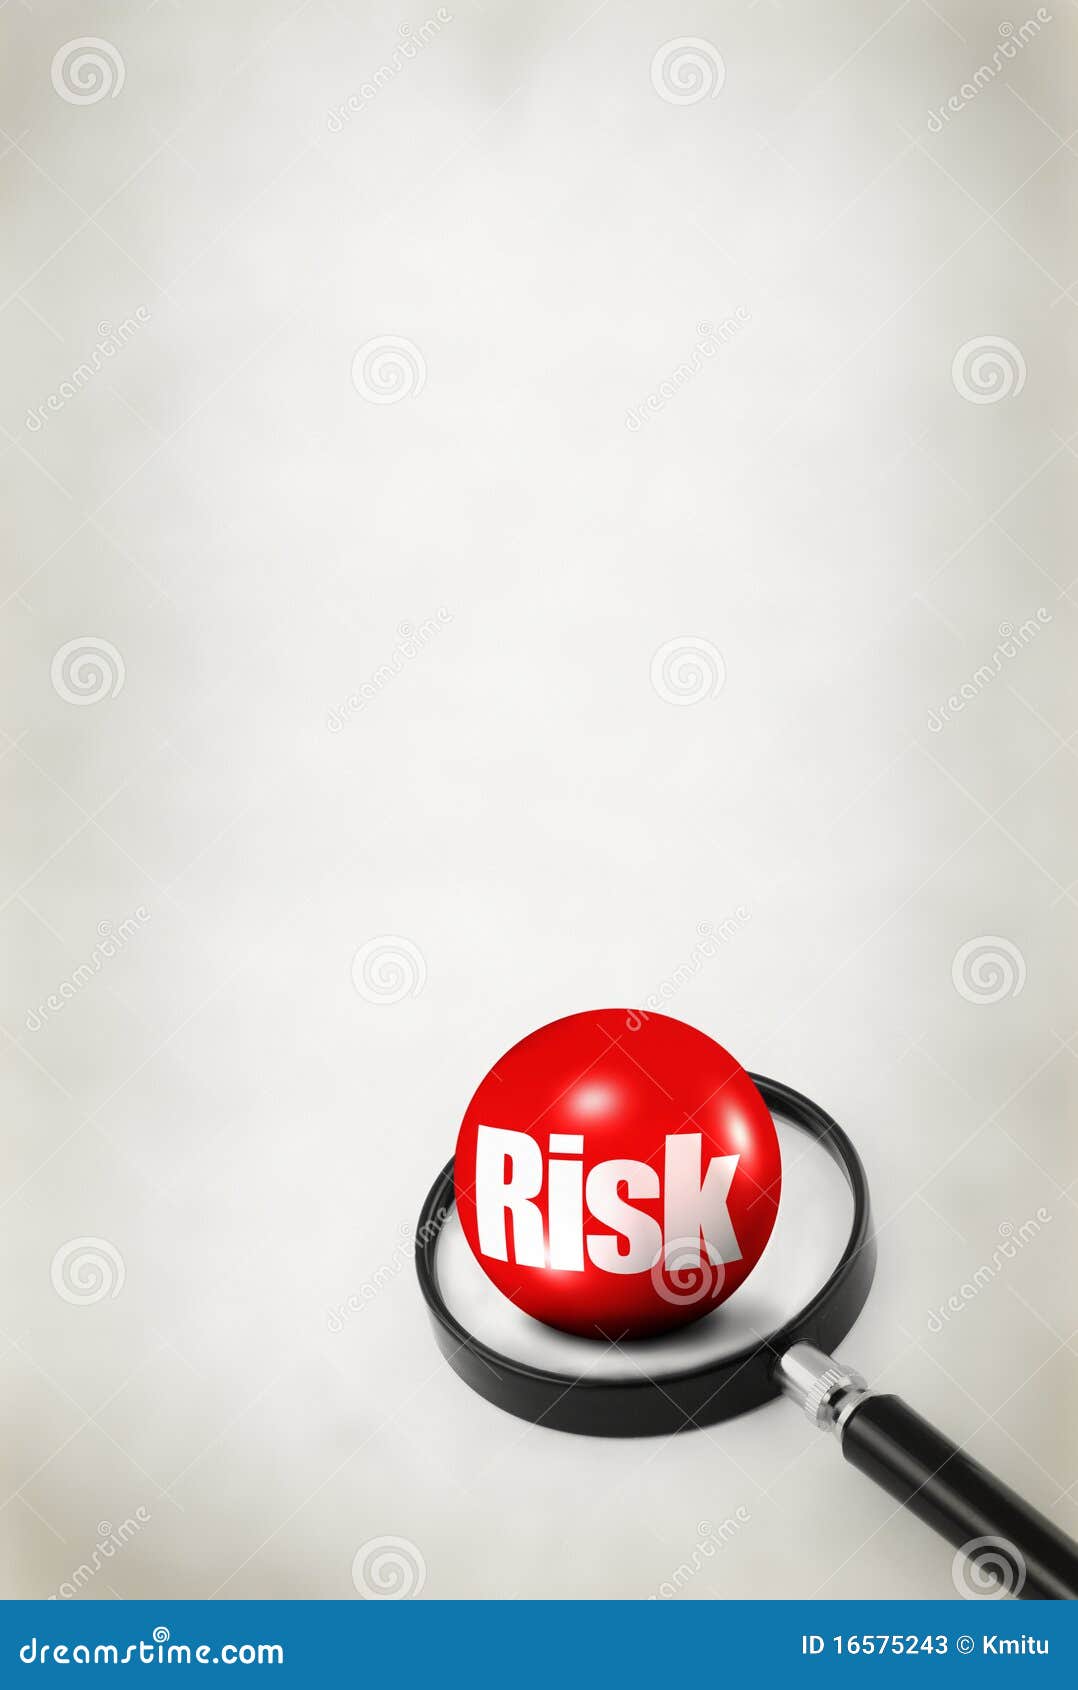 risk concept on abstract background